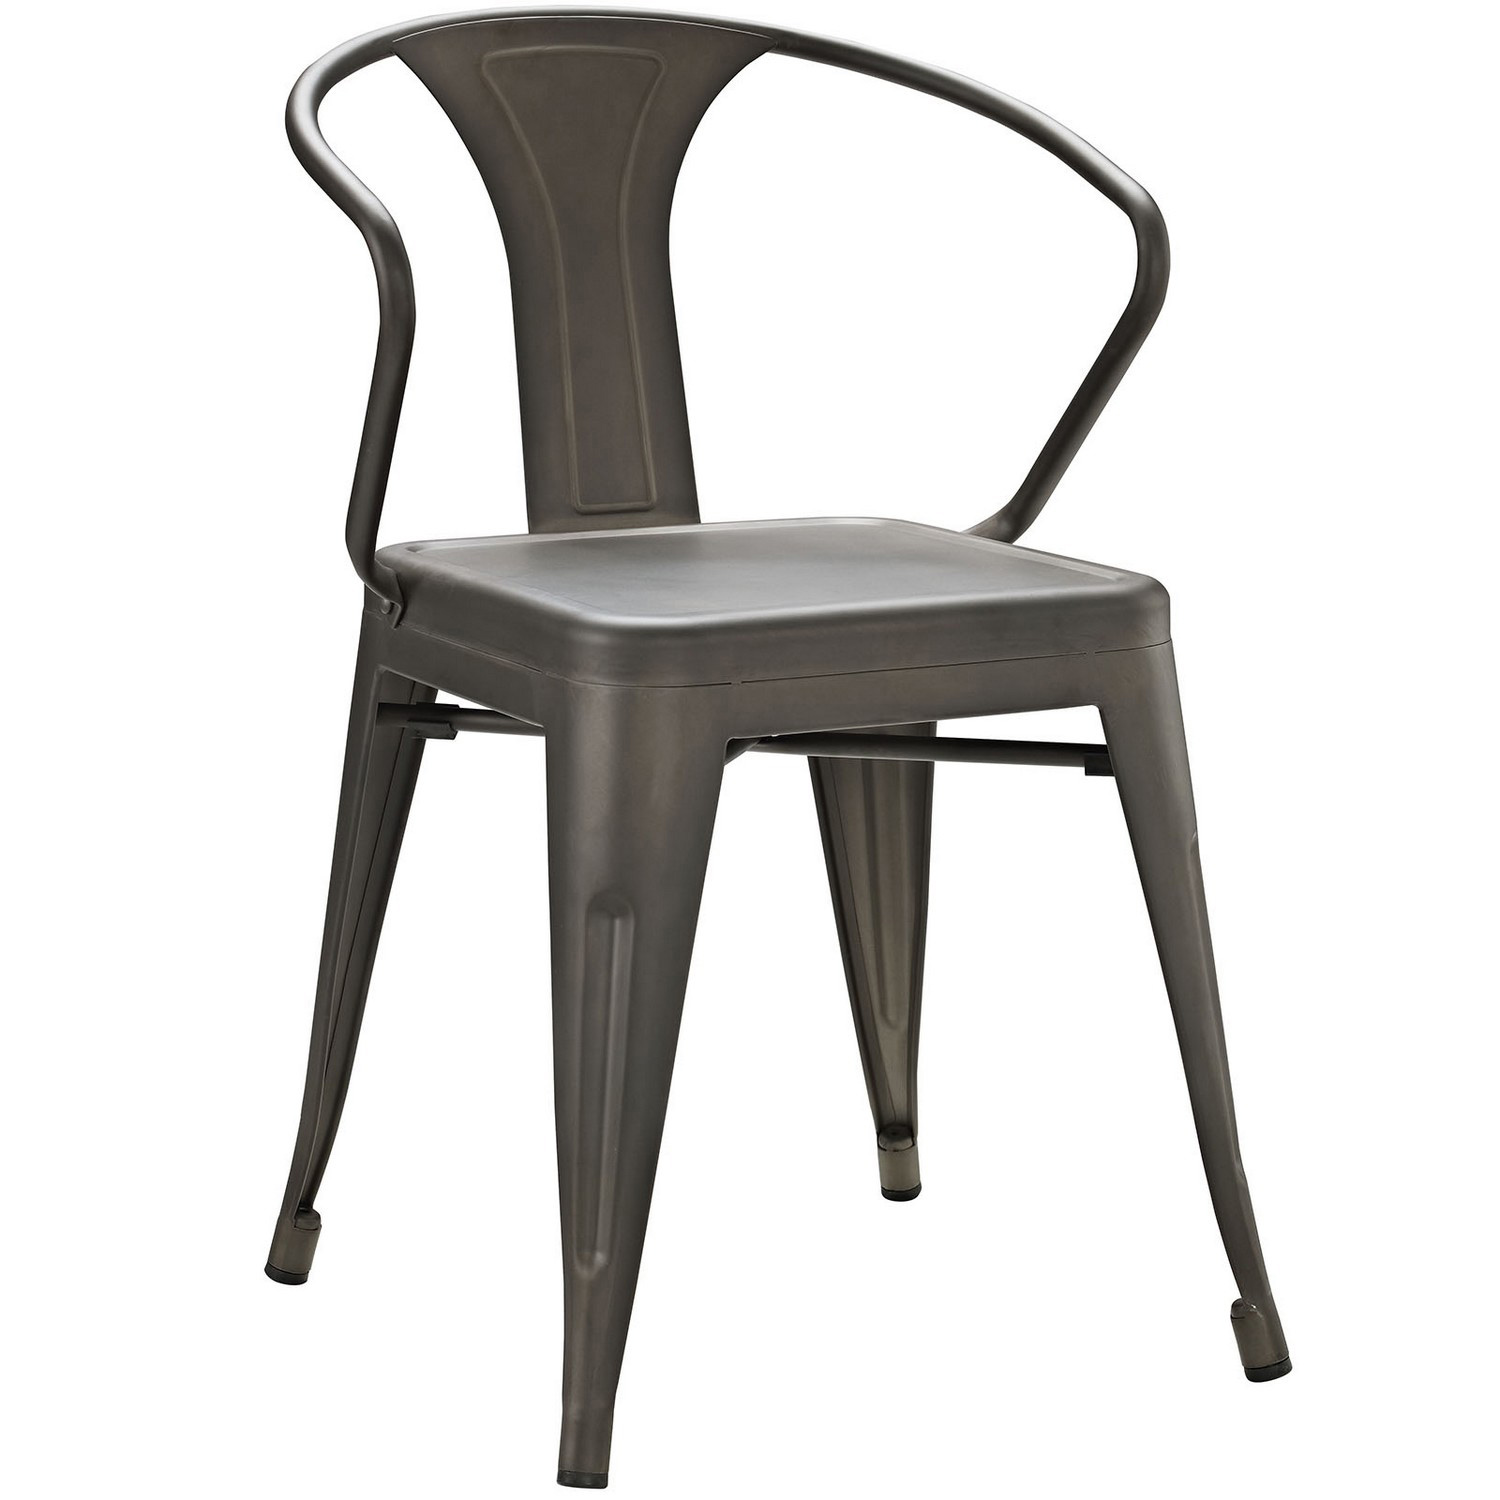 Modway Promenade Dining Chair - Brown